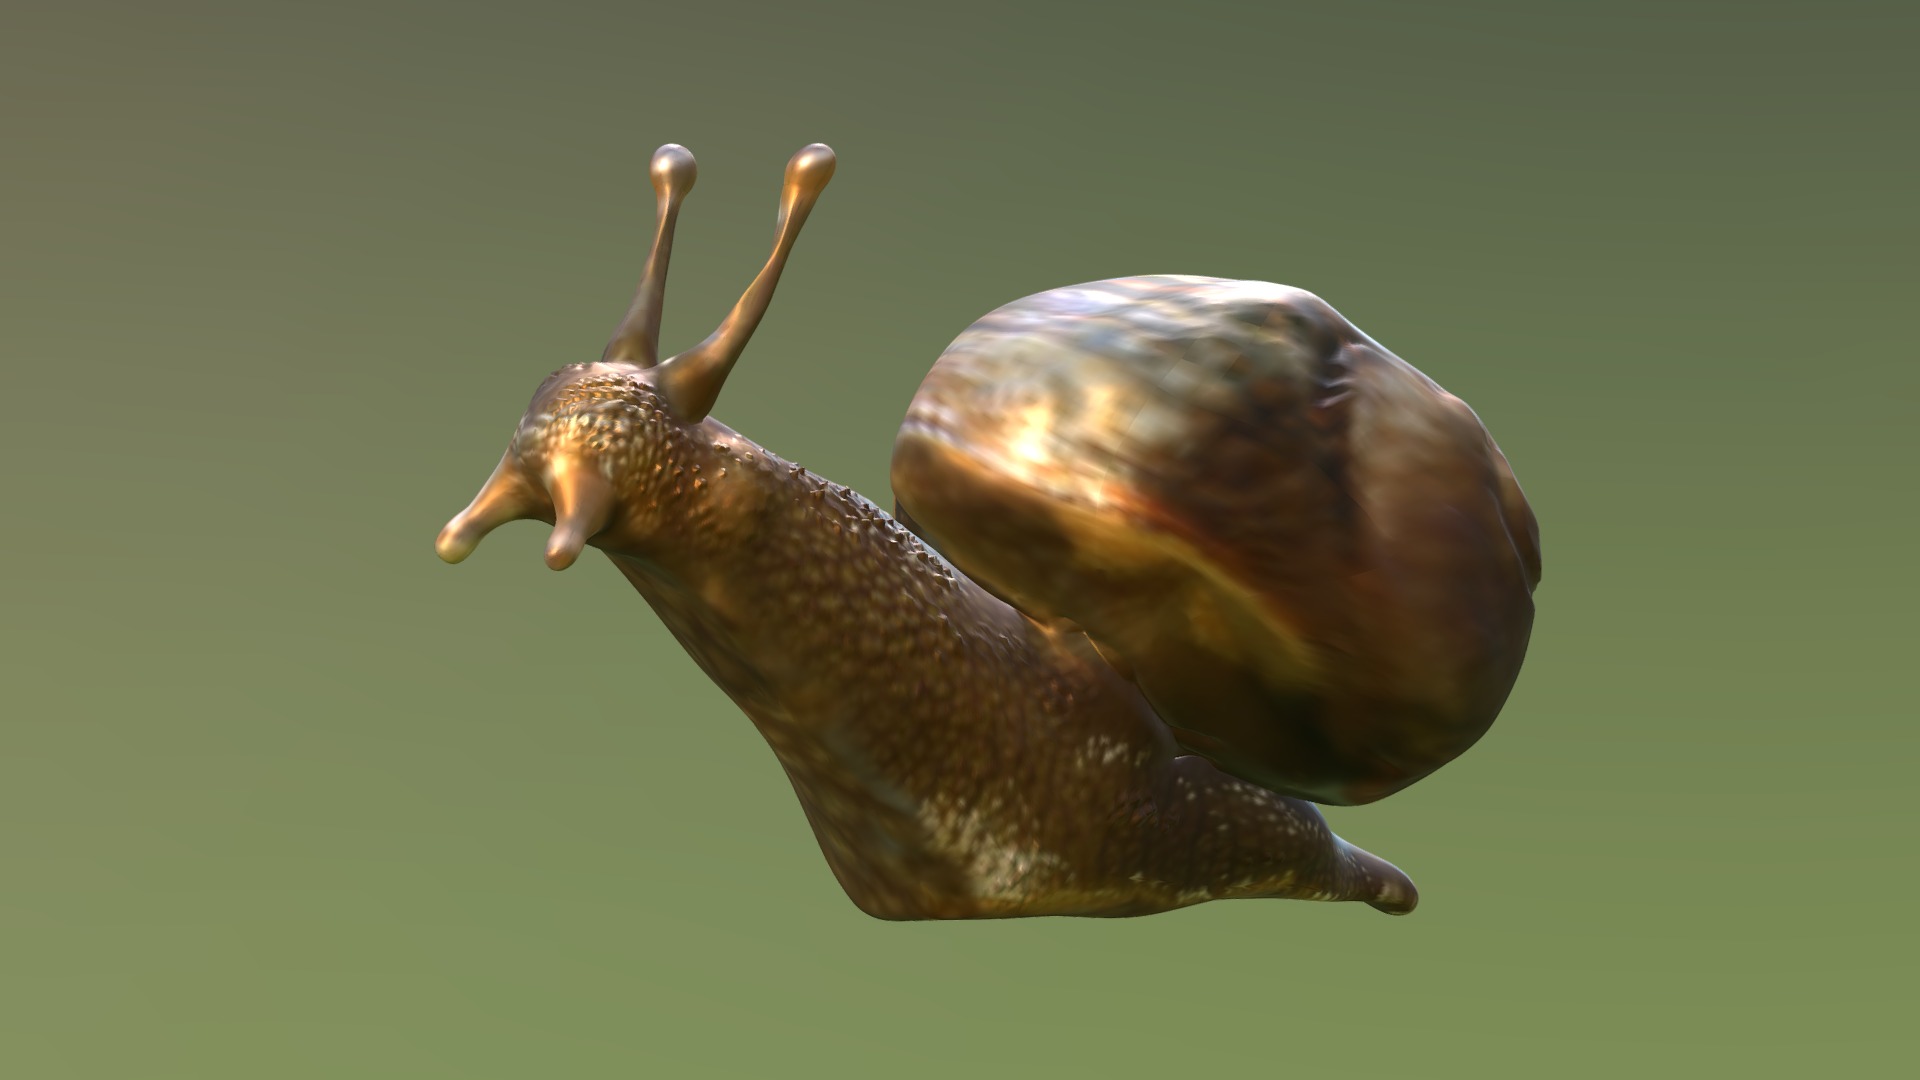 3D model Snail – Chiocciola - This is a 3D model of the Snail - Chiocciola. The 3D model is about two snails with long horns.